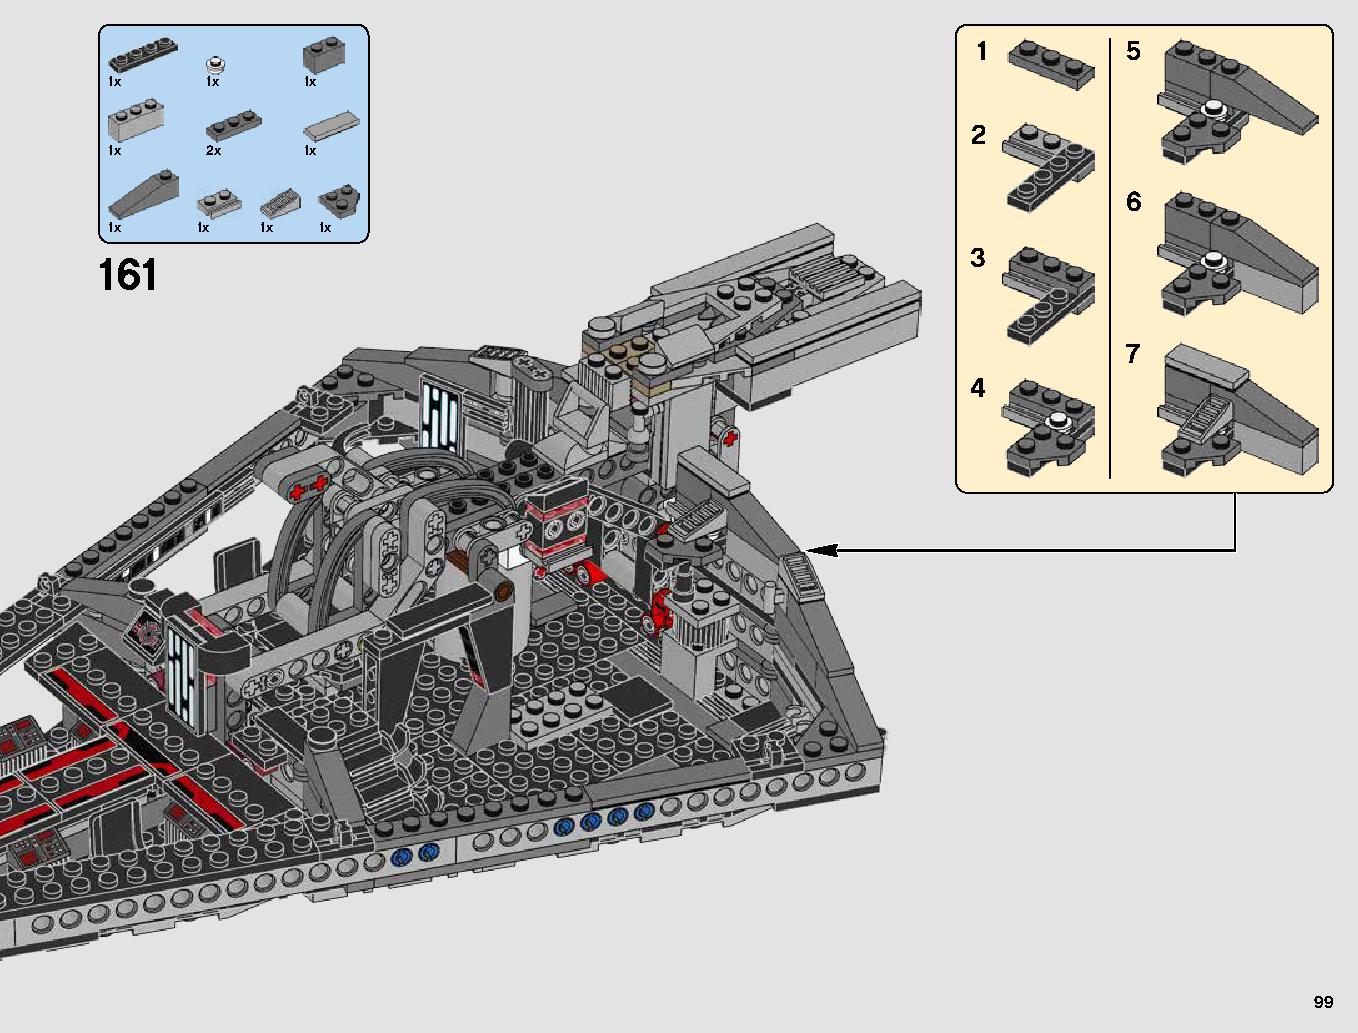 First Order Star Destroyer 75190 レゴの商品情報 レゴの説明書・組立方法 99 page